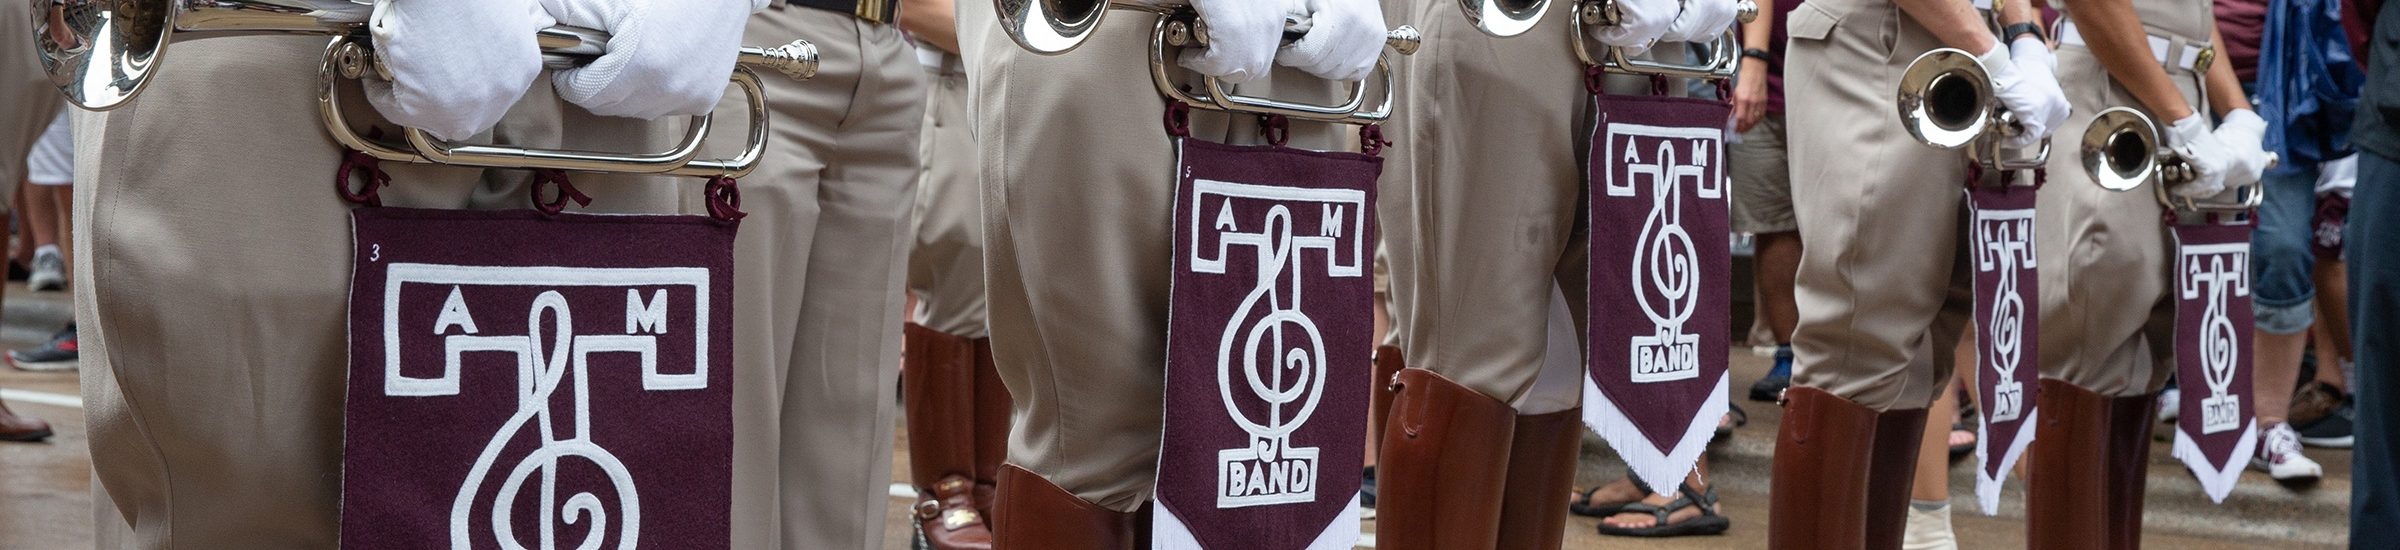 Aggie band in formation